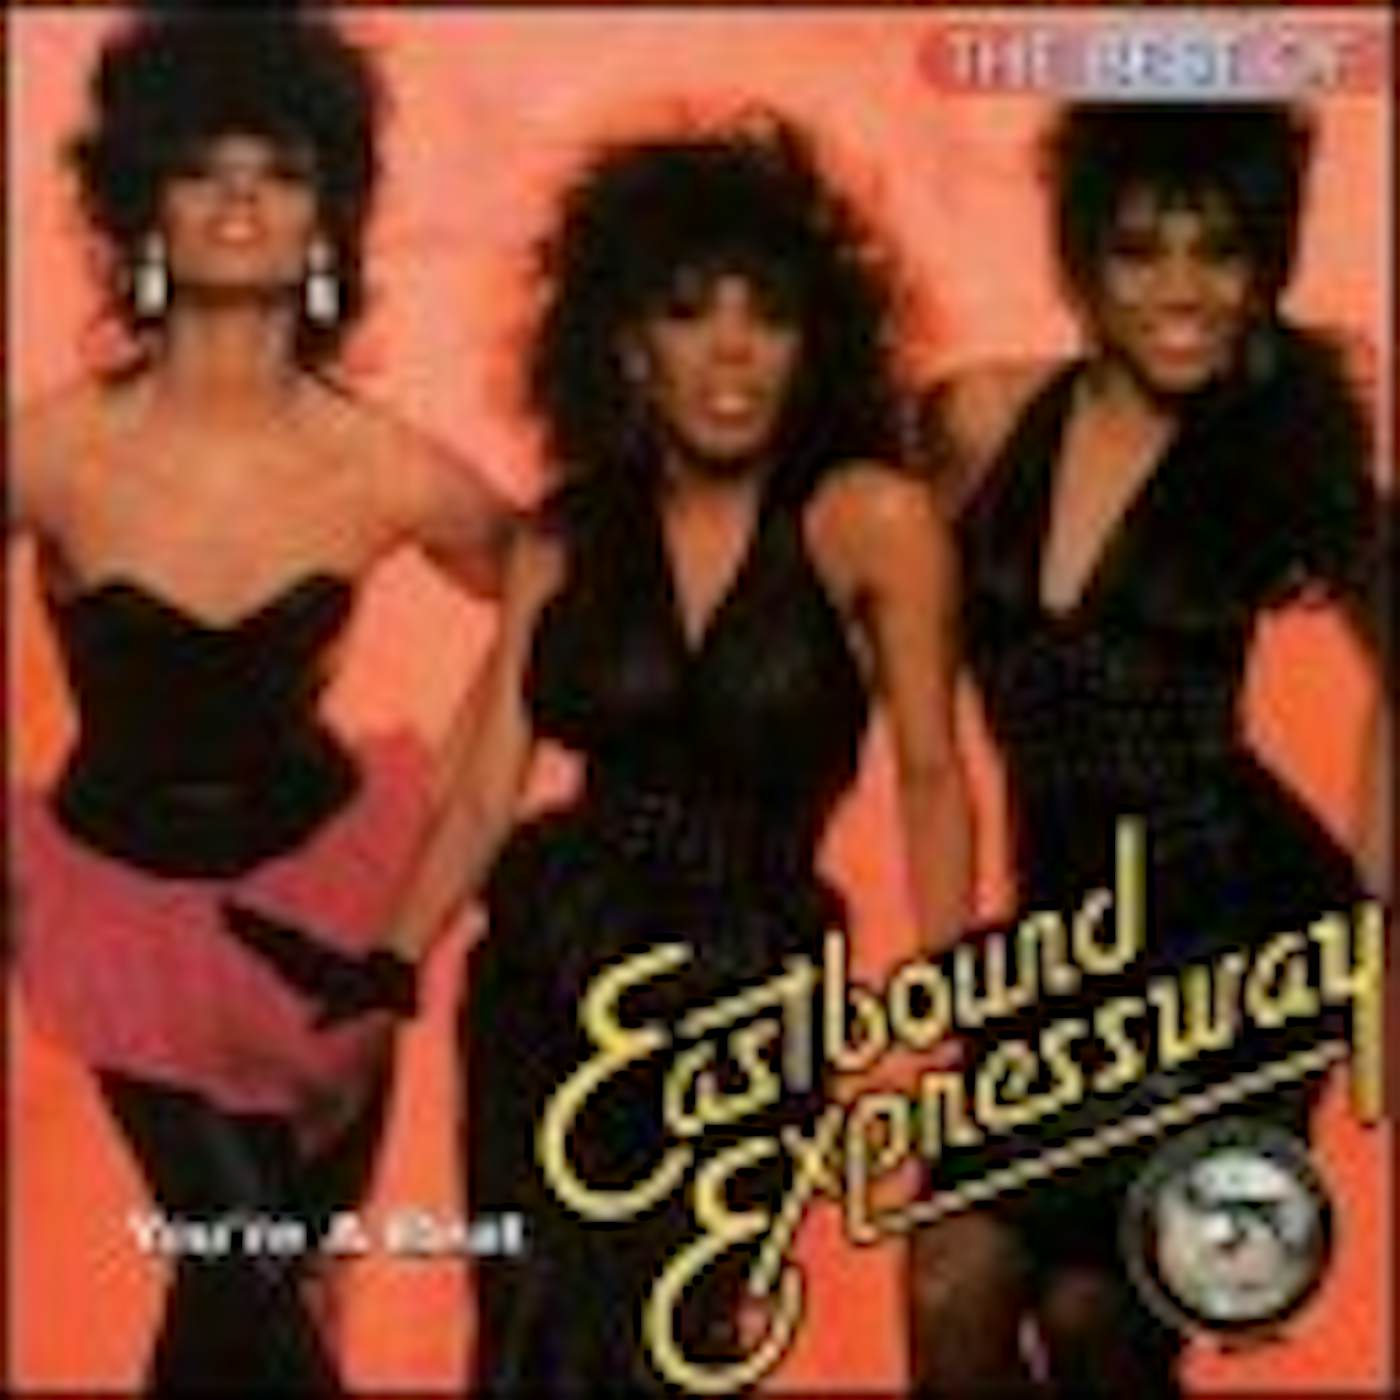 Eastbound Expressway BEST OF: YOU'RE A BEAT CD